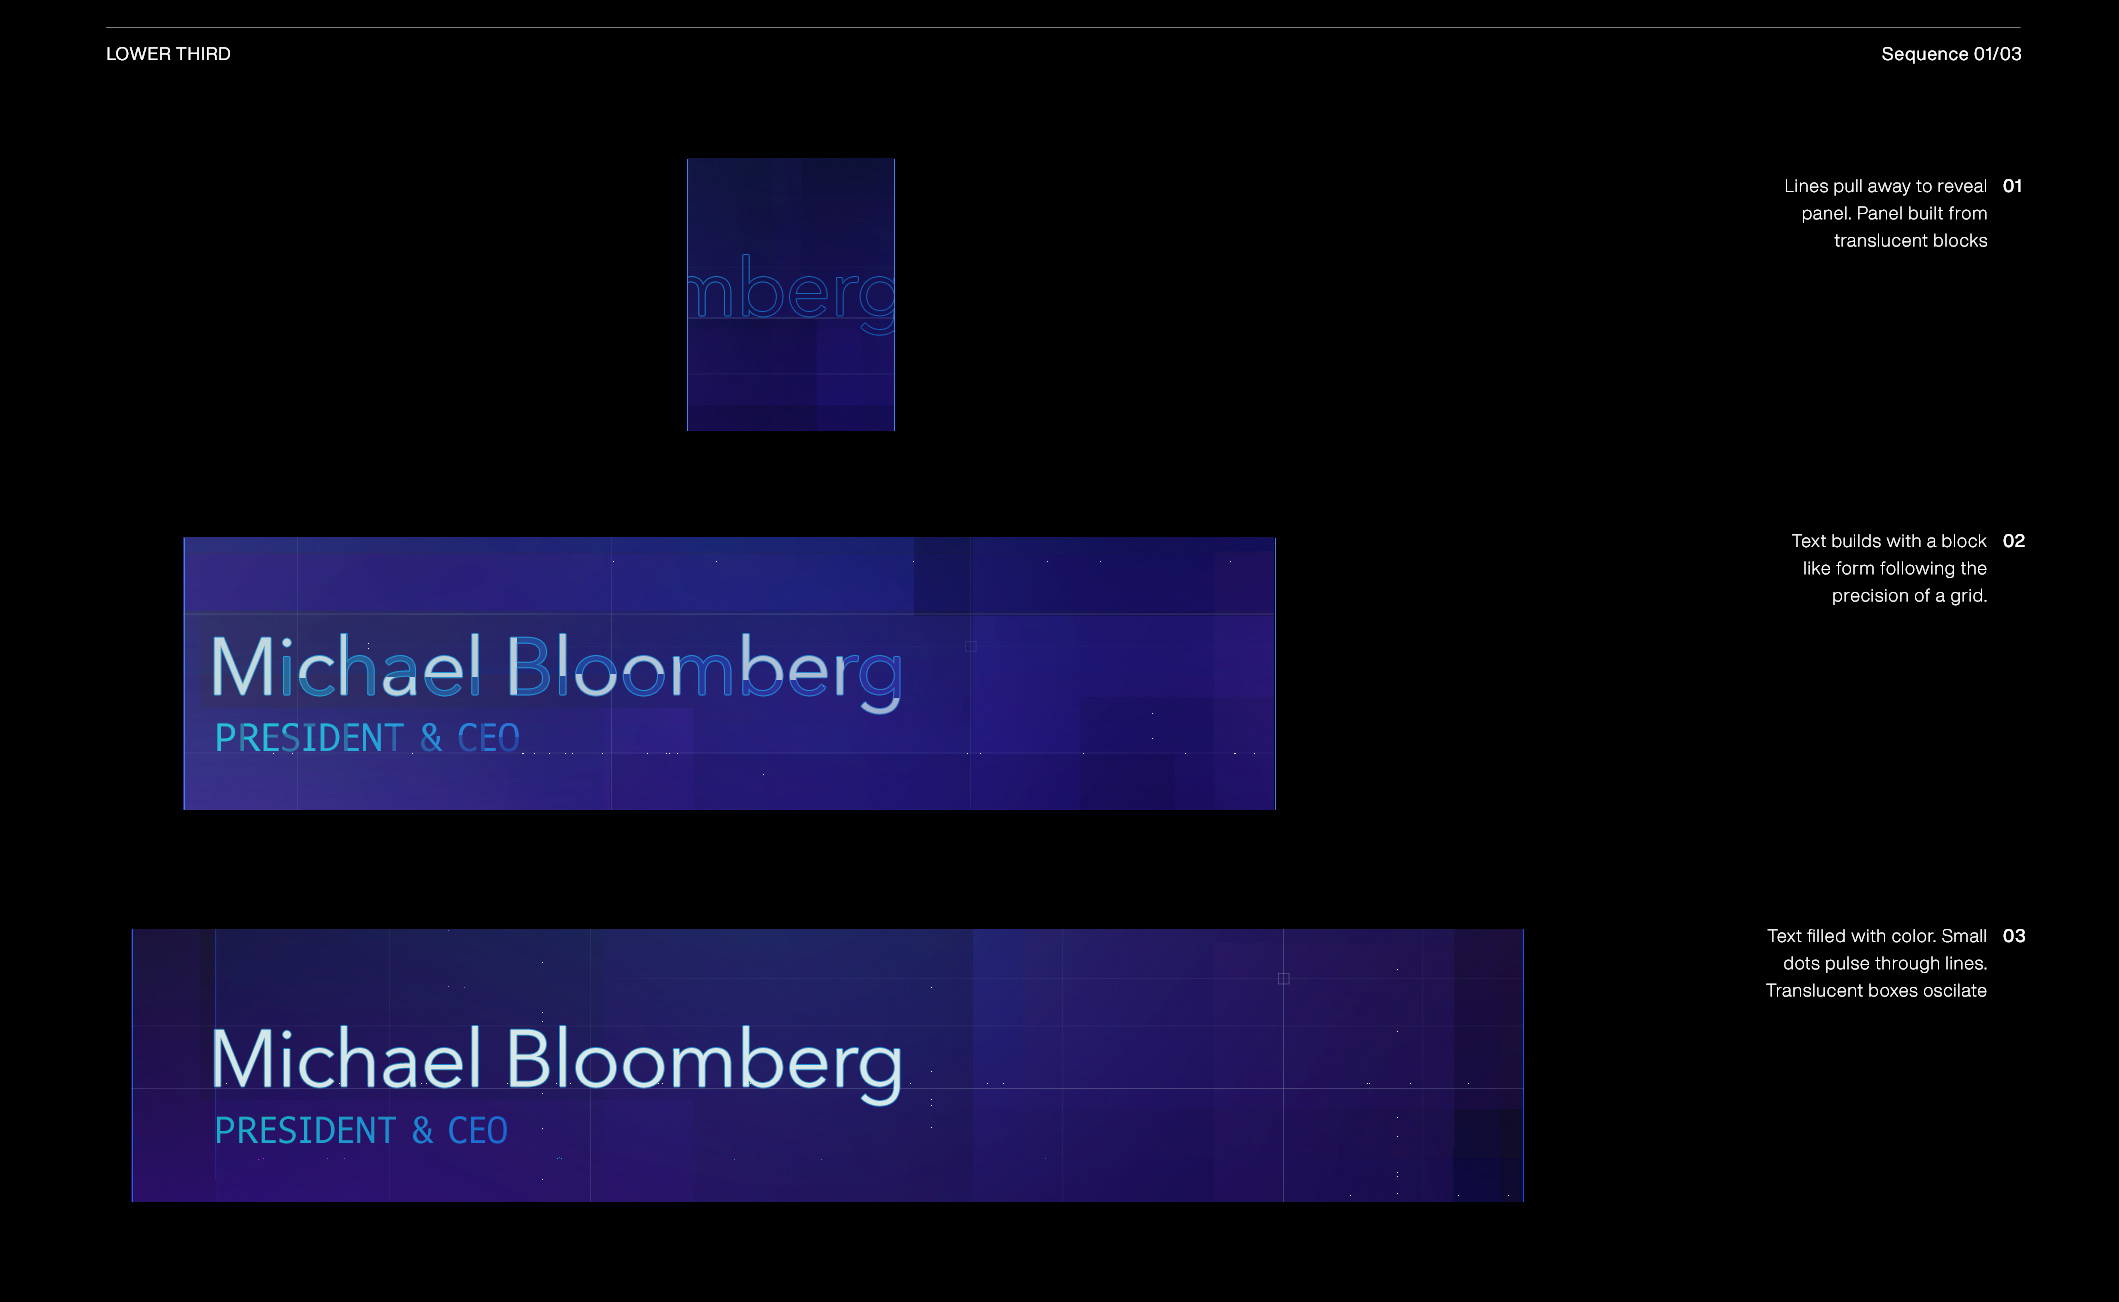 bloomberg-L3-sequence